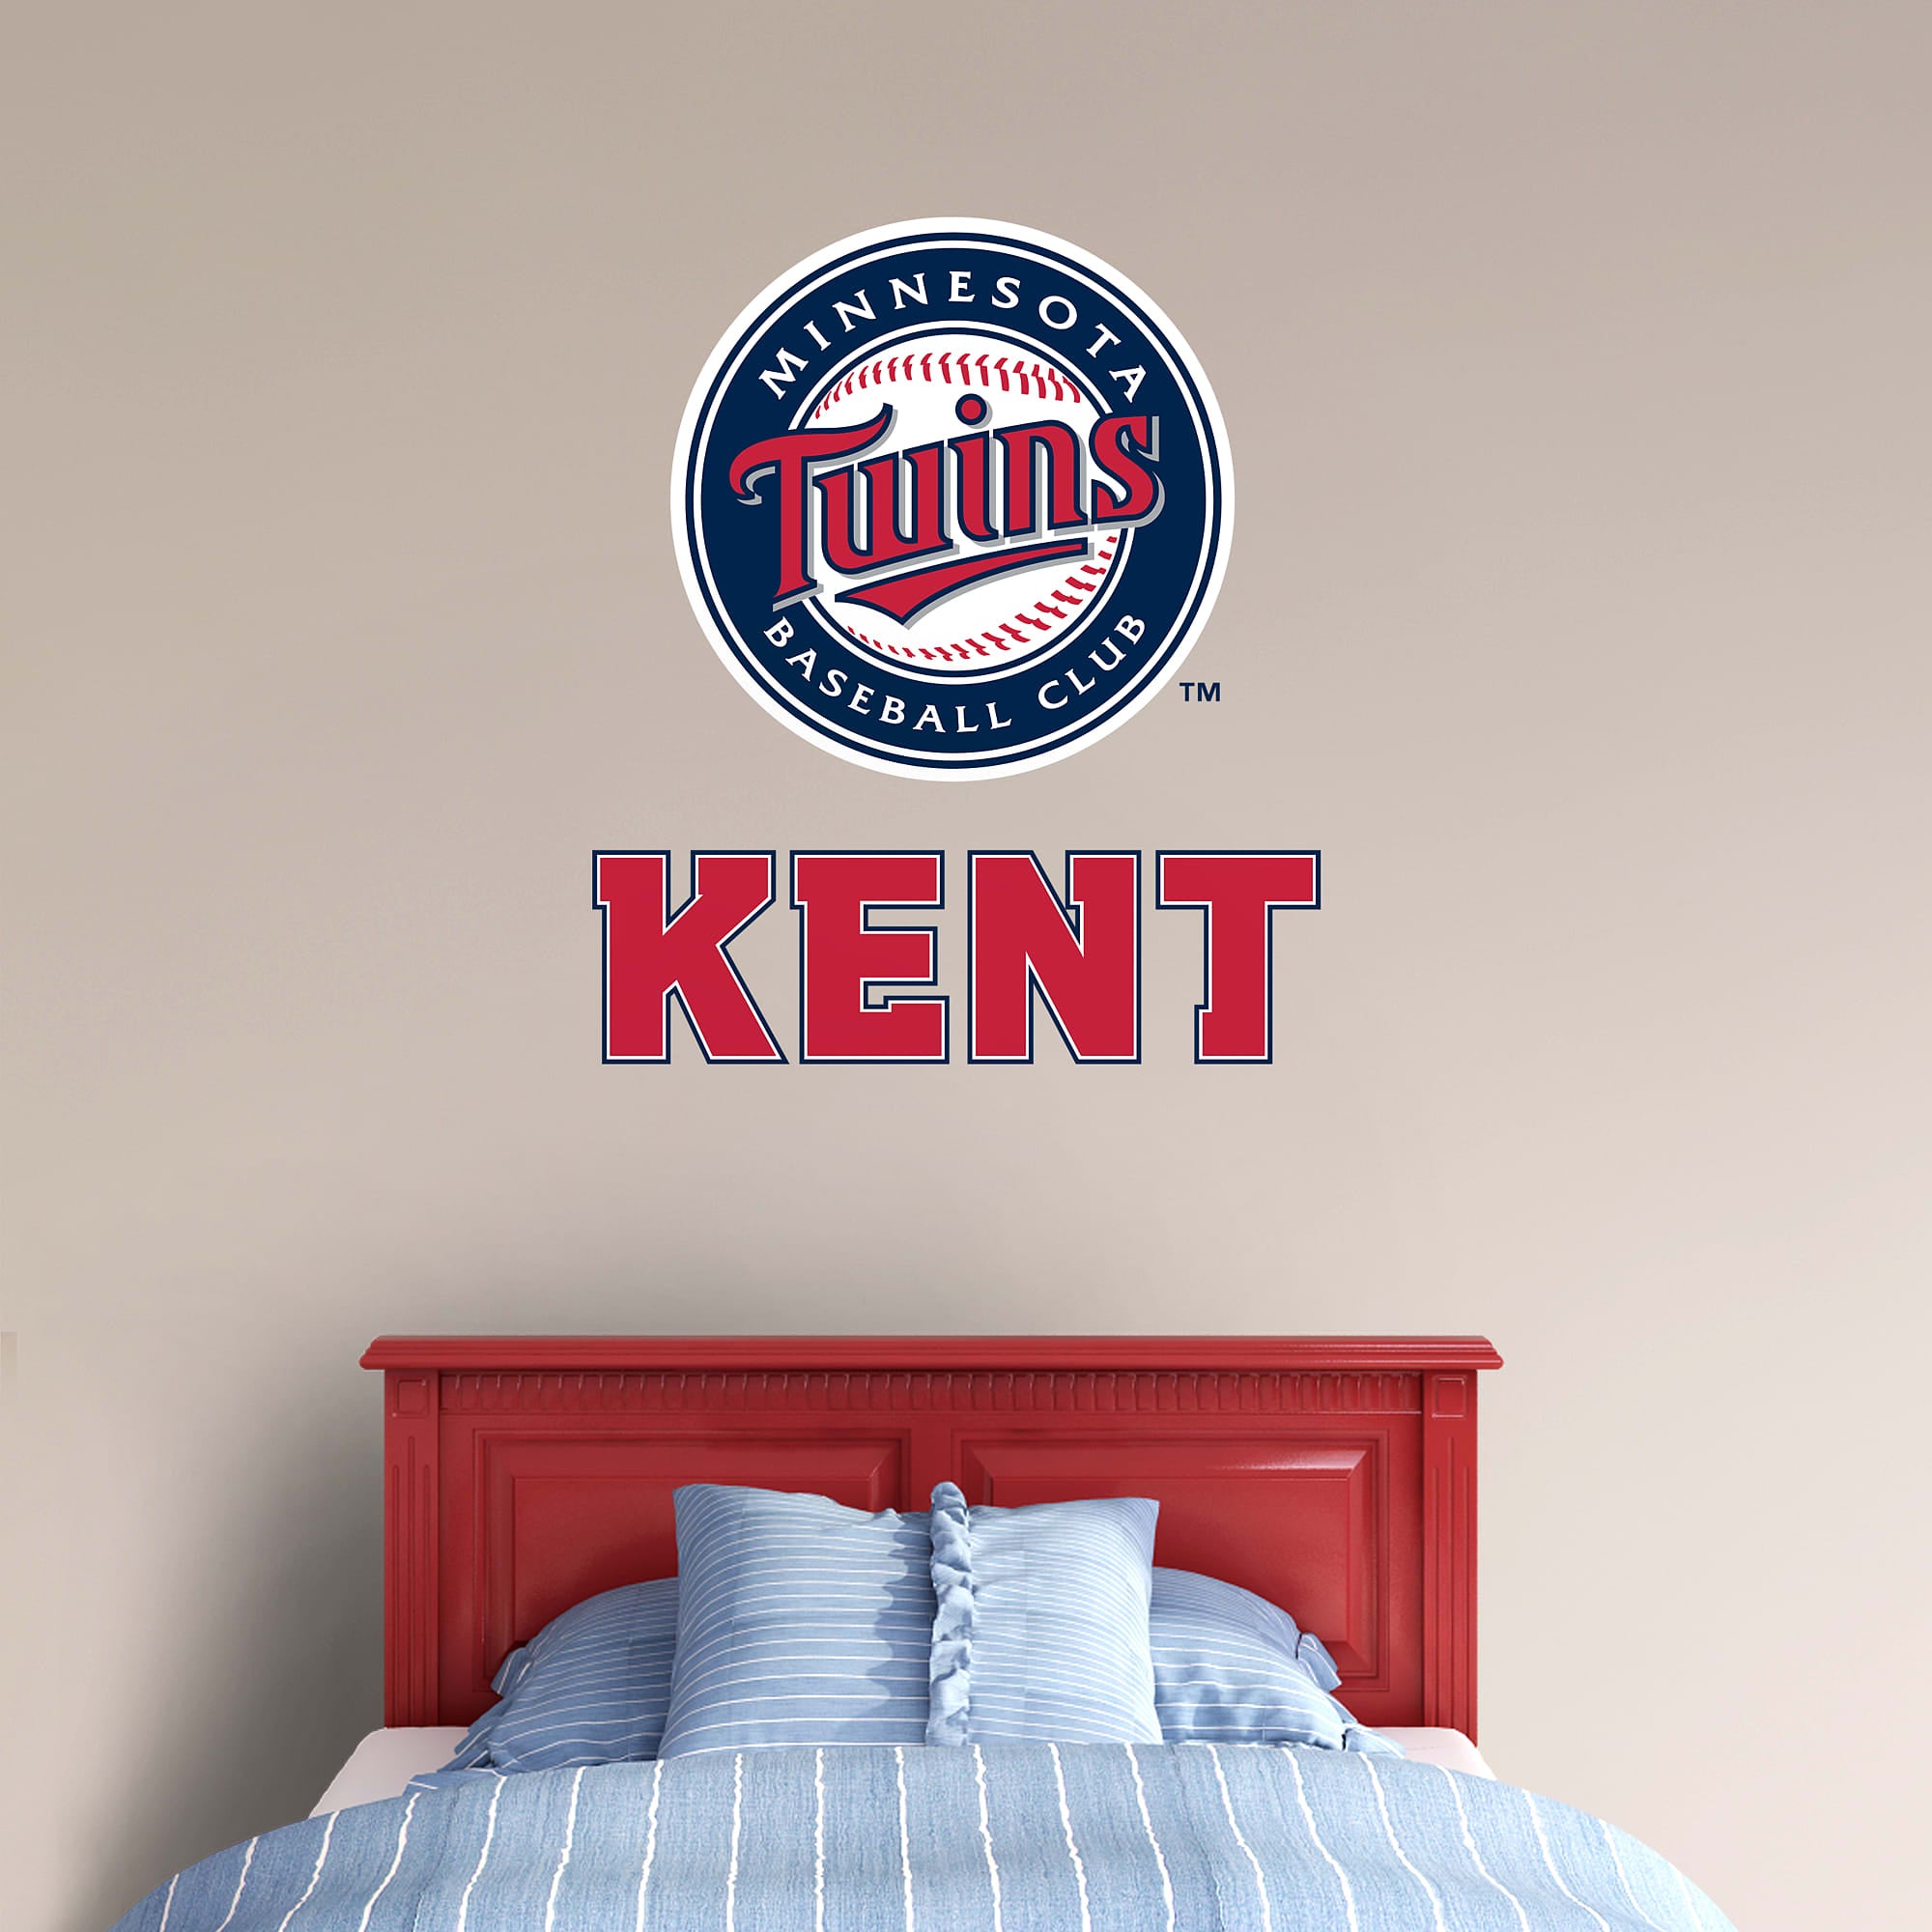 Minnesota Twins: Stacked Personalized Name - Officially Licensed MLB Transfer Decal in Red (52"W x 39.5"H) by Fathead | Vinyl